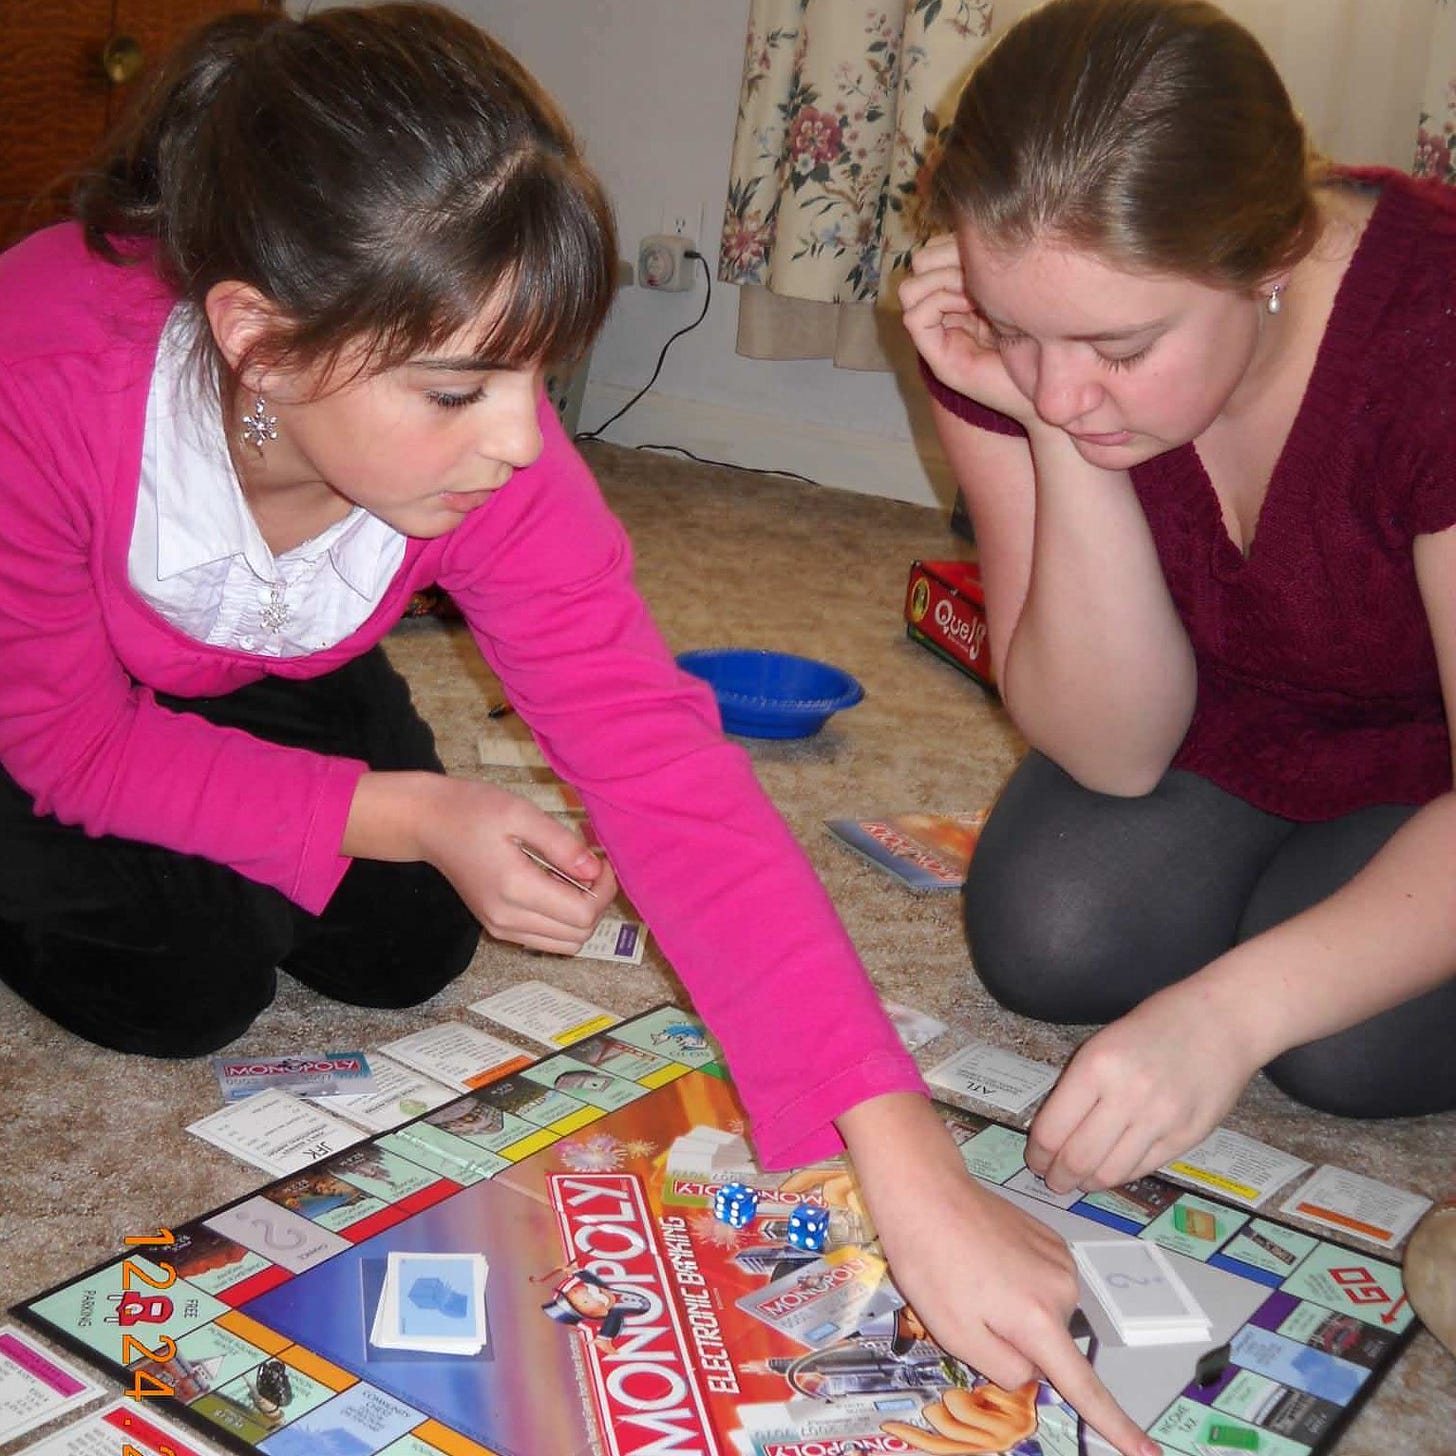 Two teen girls sitting on the floor playing a board game